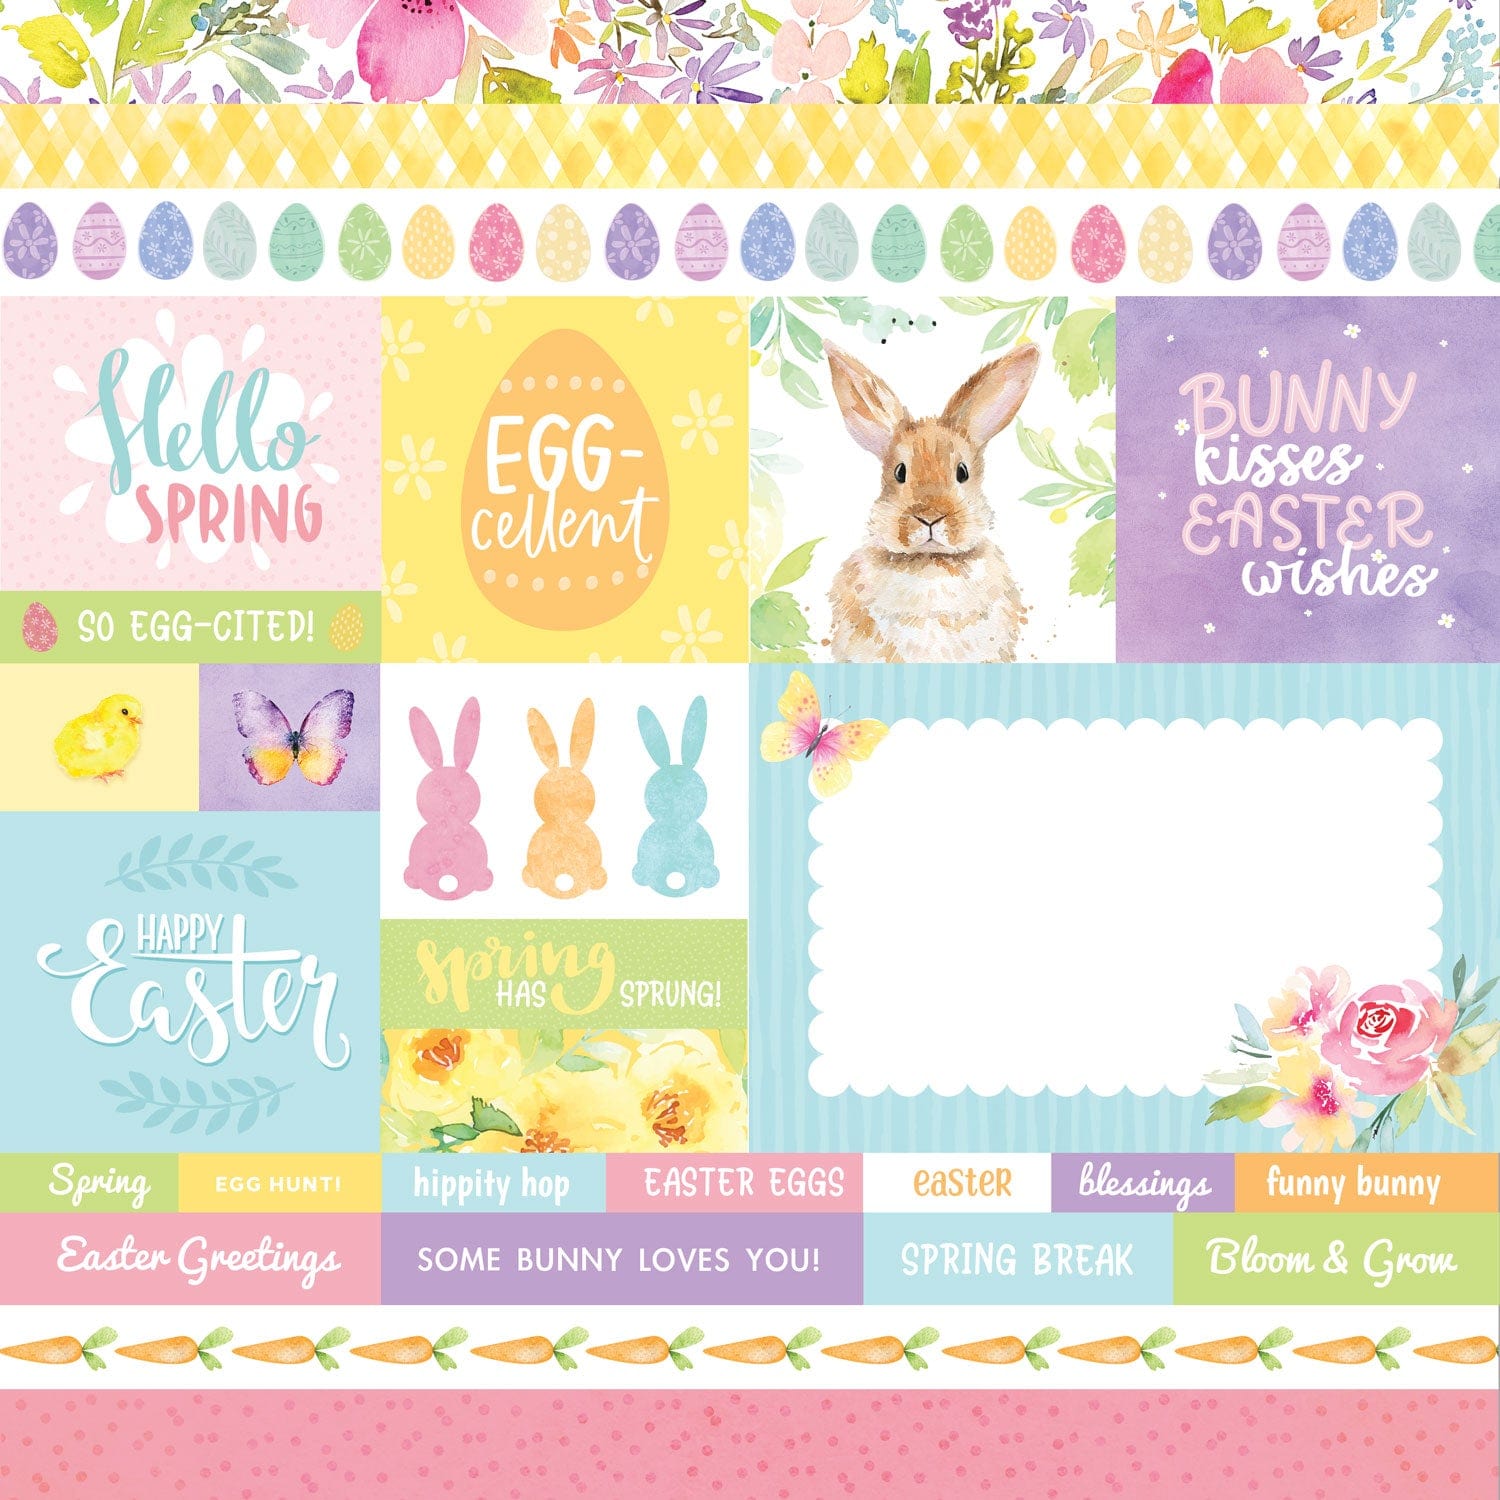 My Favorite Easter: Colored Eggs 12x12 Patterned Paper - Echo Park